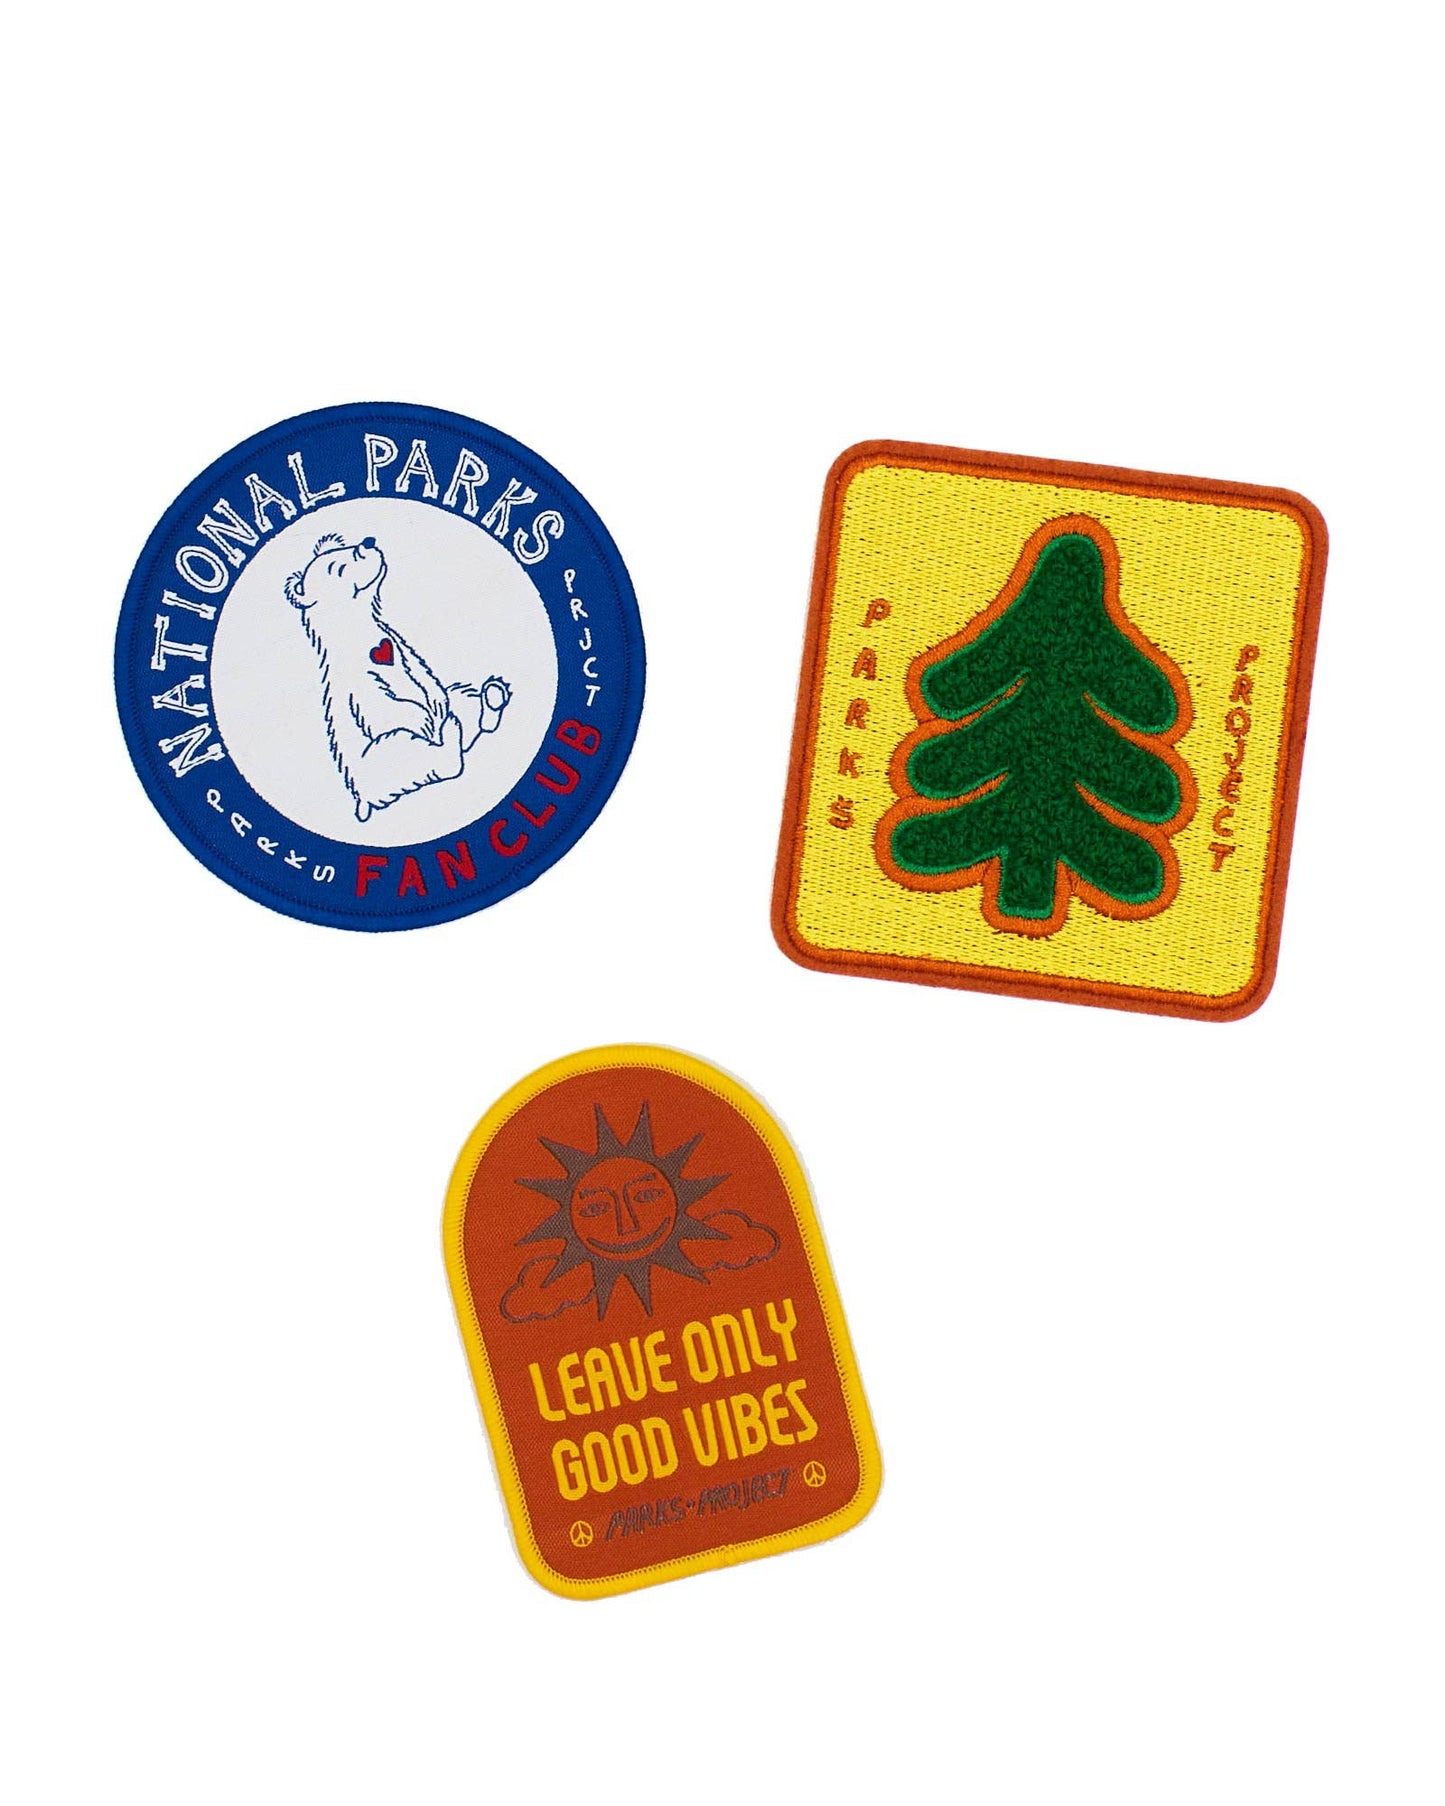 Patch collection by Parks Project with round National Parks bear fan club patch, pine tree chenille patch and Leave Only Good Vibes sunshine orange patch